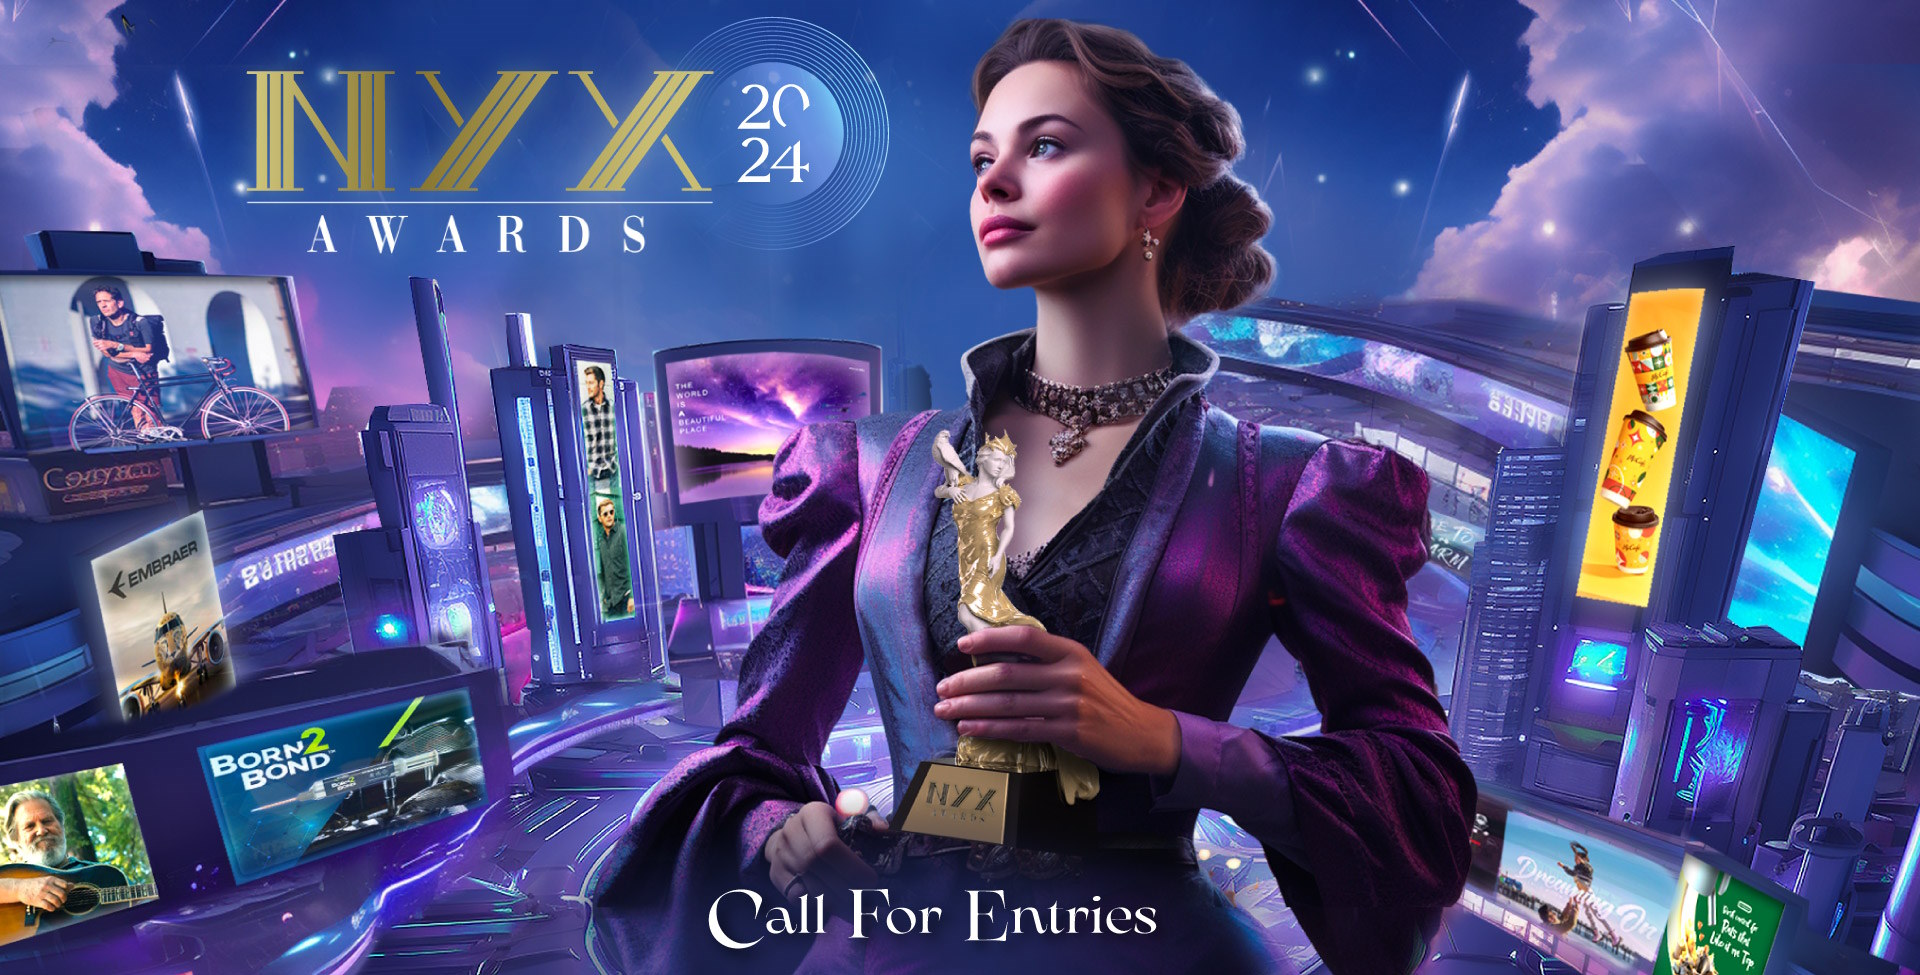 The NYX Game Awards Celebrates 2021's Class of Winners